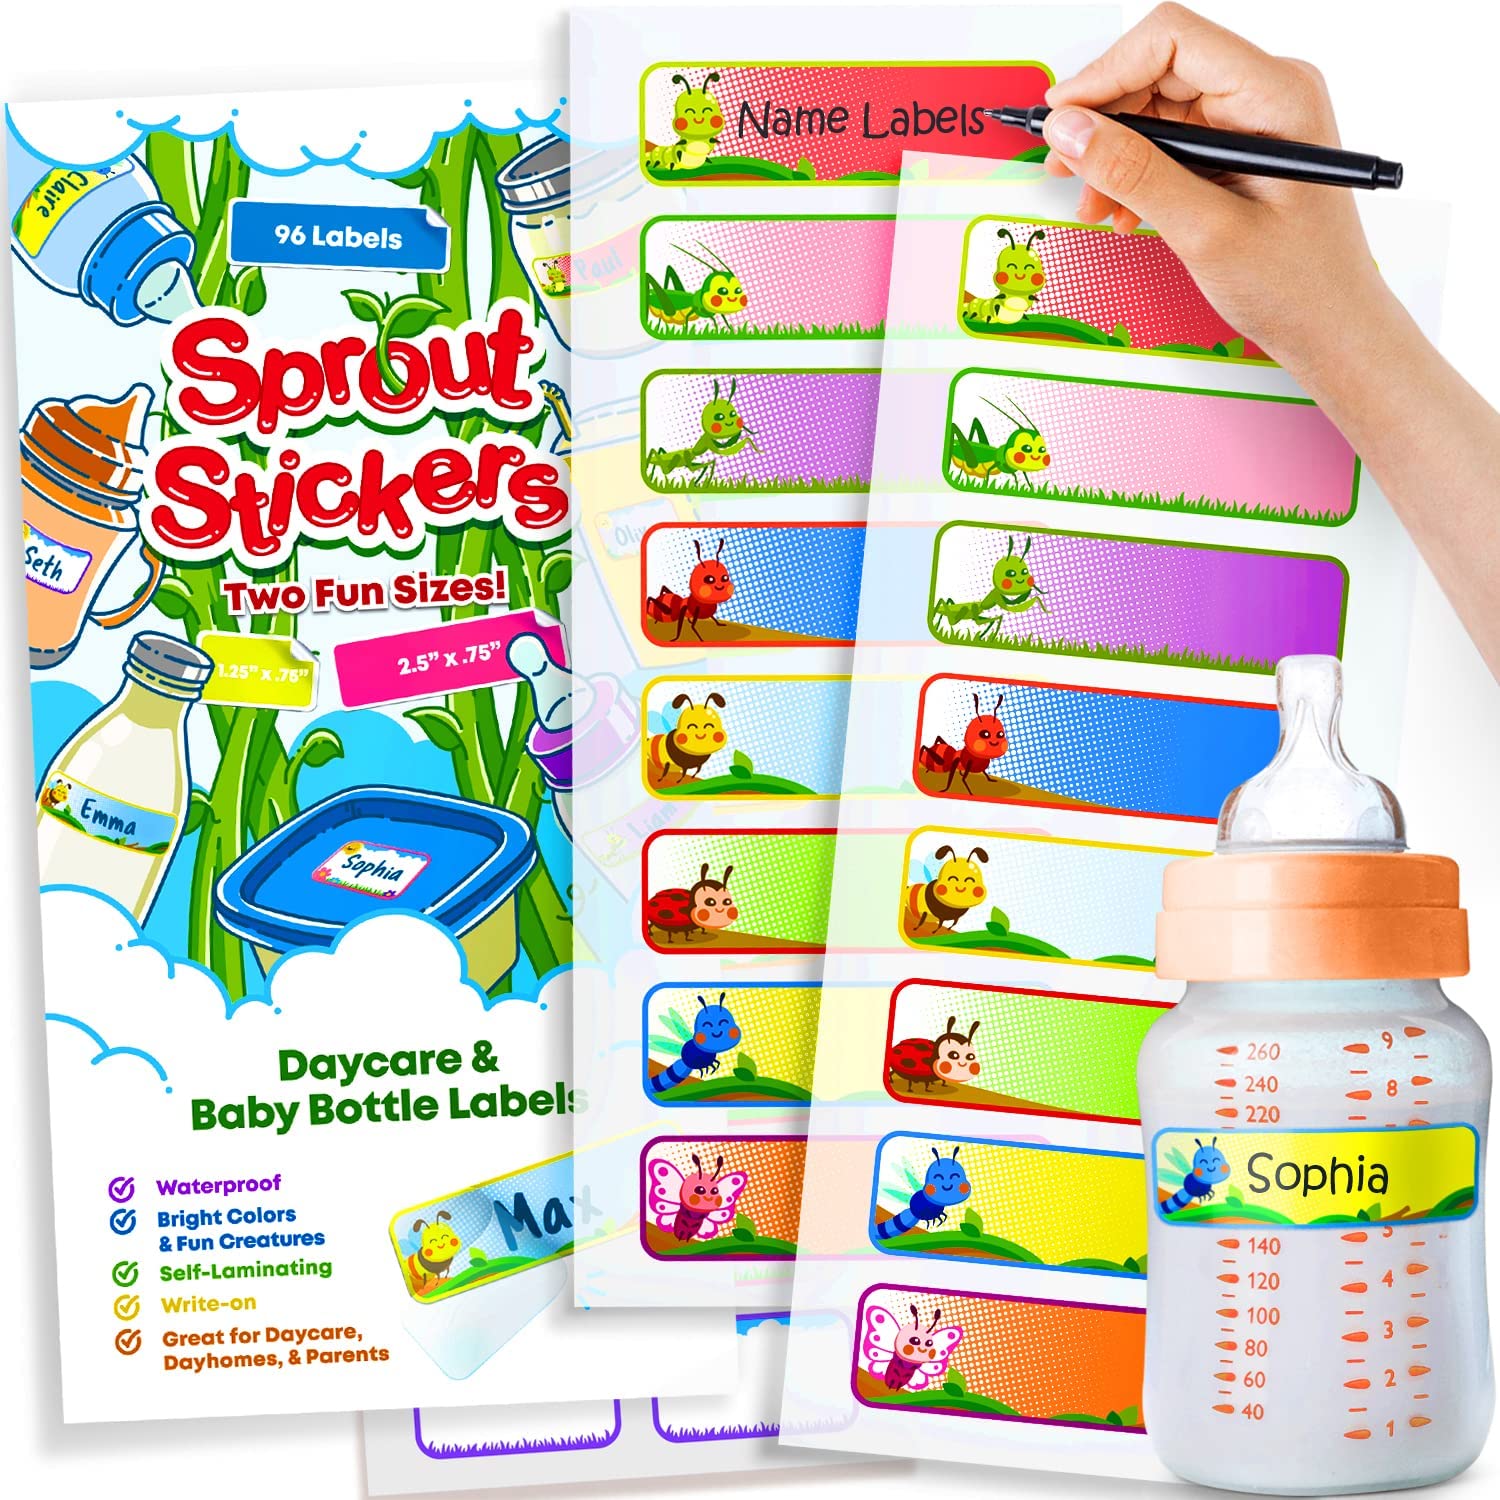 Sprout Stickers Baby Bottle Labels for Kids and Babies - 96